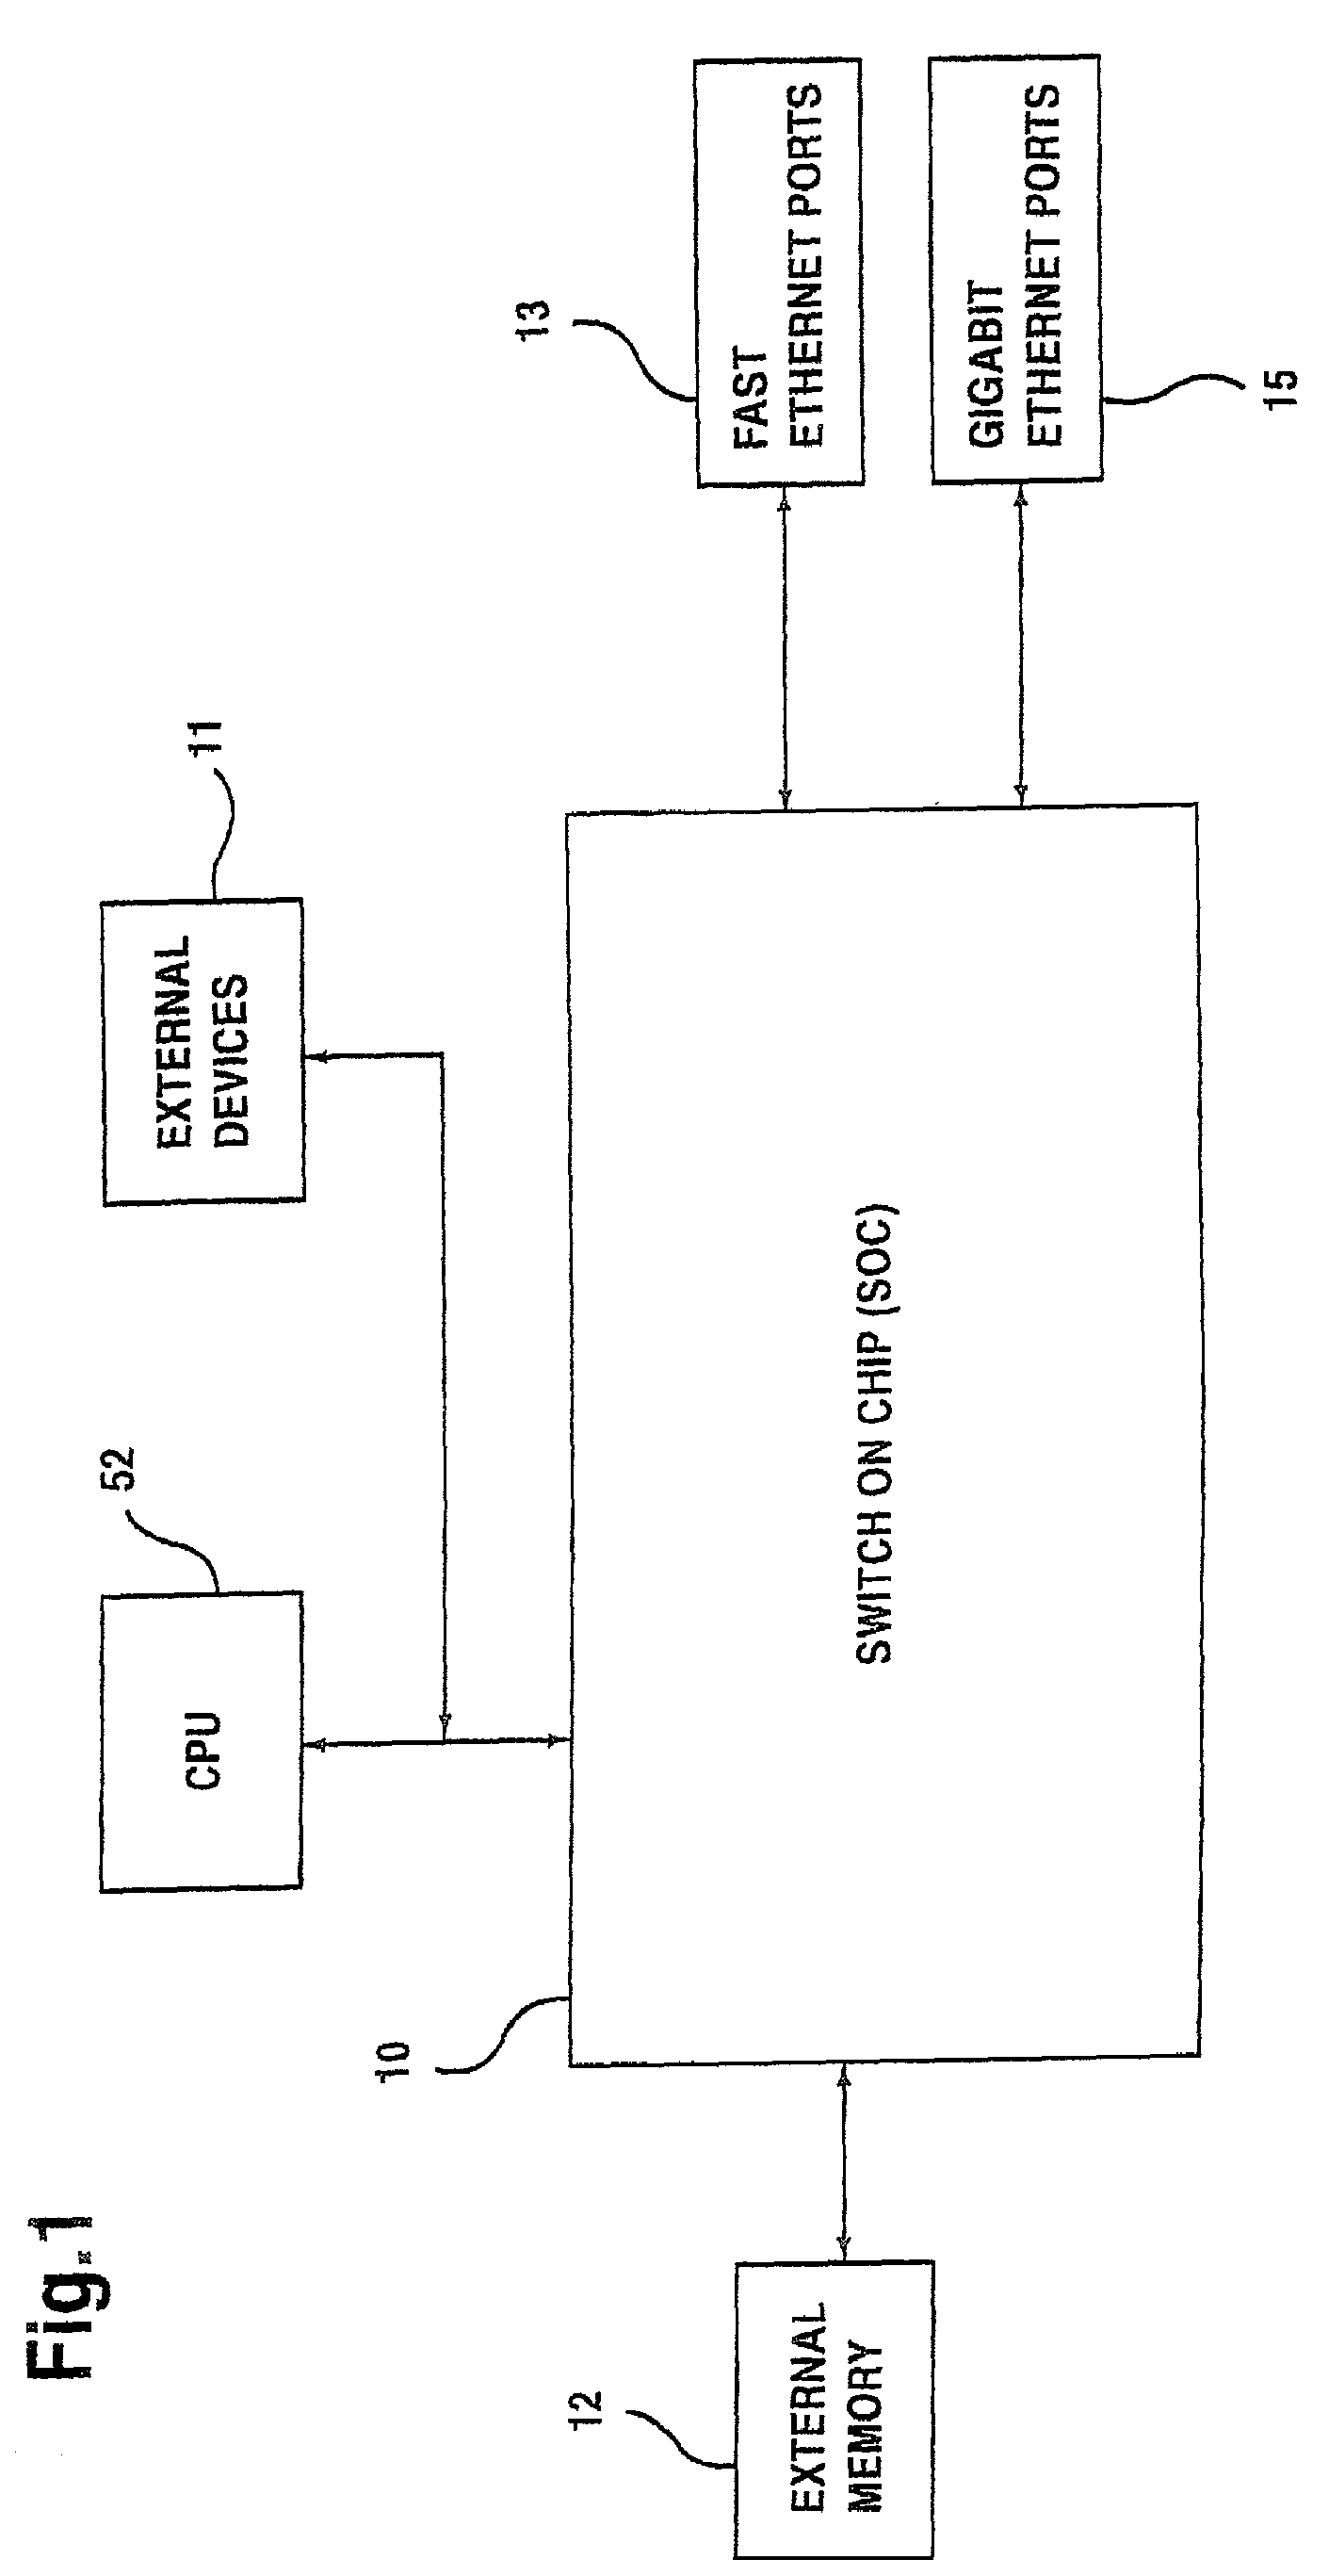 Pointer based binary search engine and method for use in network devices